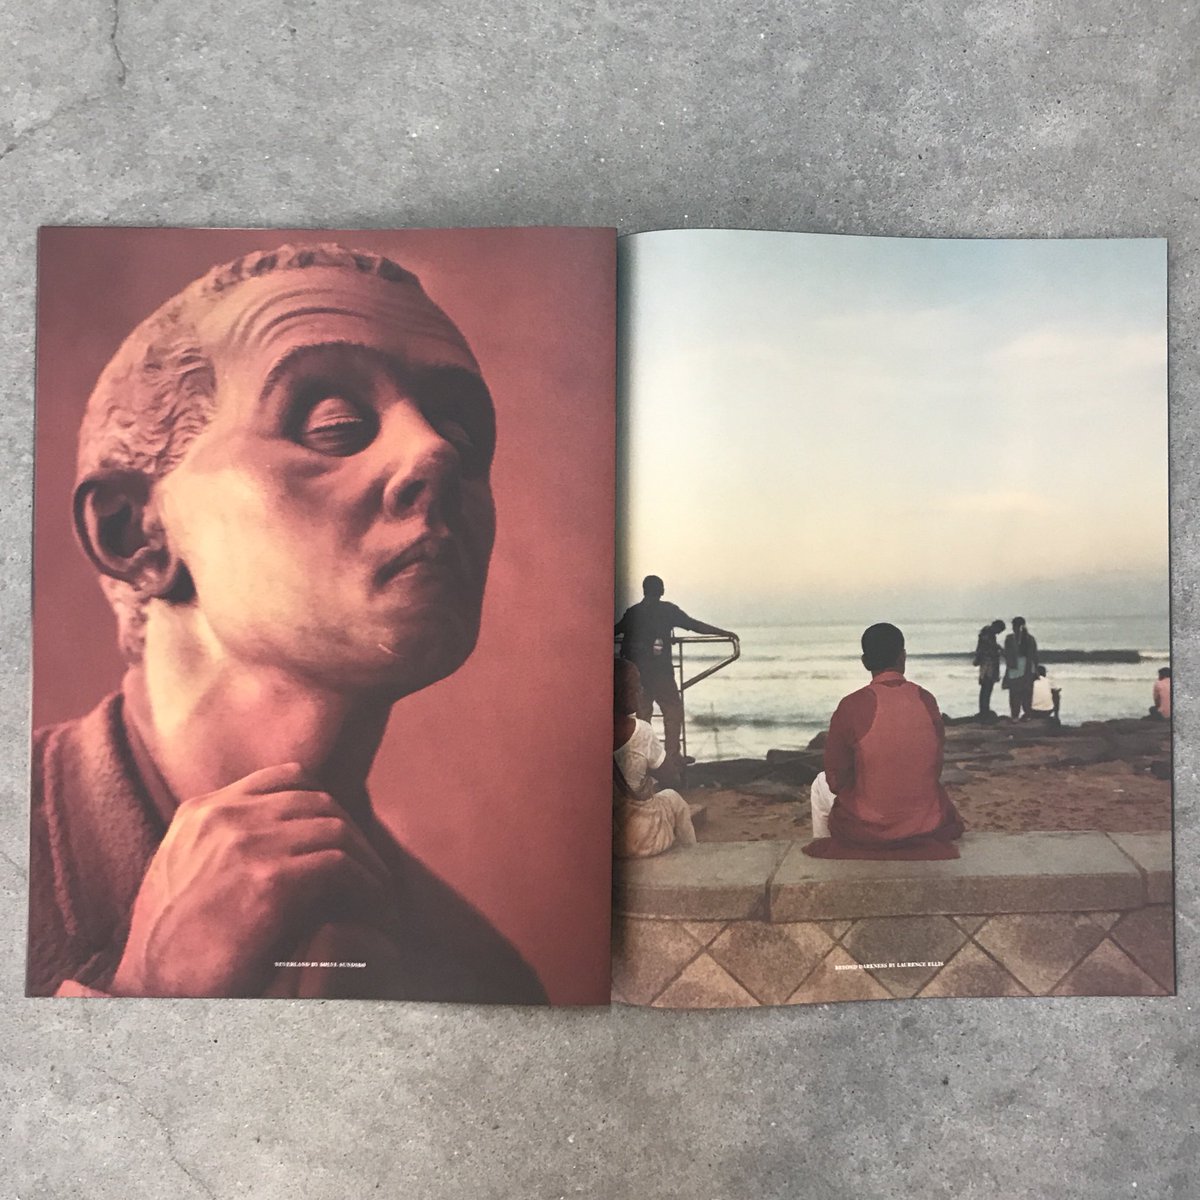 Just arrived in the Magazine Store: Vol. II of Sixteen Journal, a tabloid-size photography magazine encapsulating seven artists’ work on the feeling of pain, with a cover image by Norwegian photographer Solve Sundsbo. #sixteenjournal